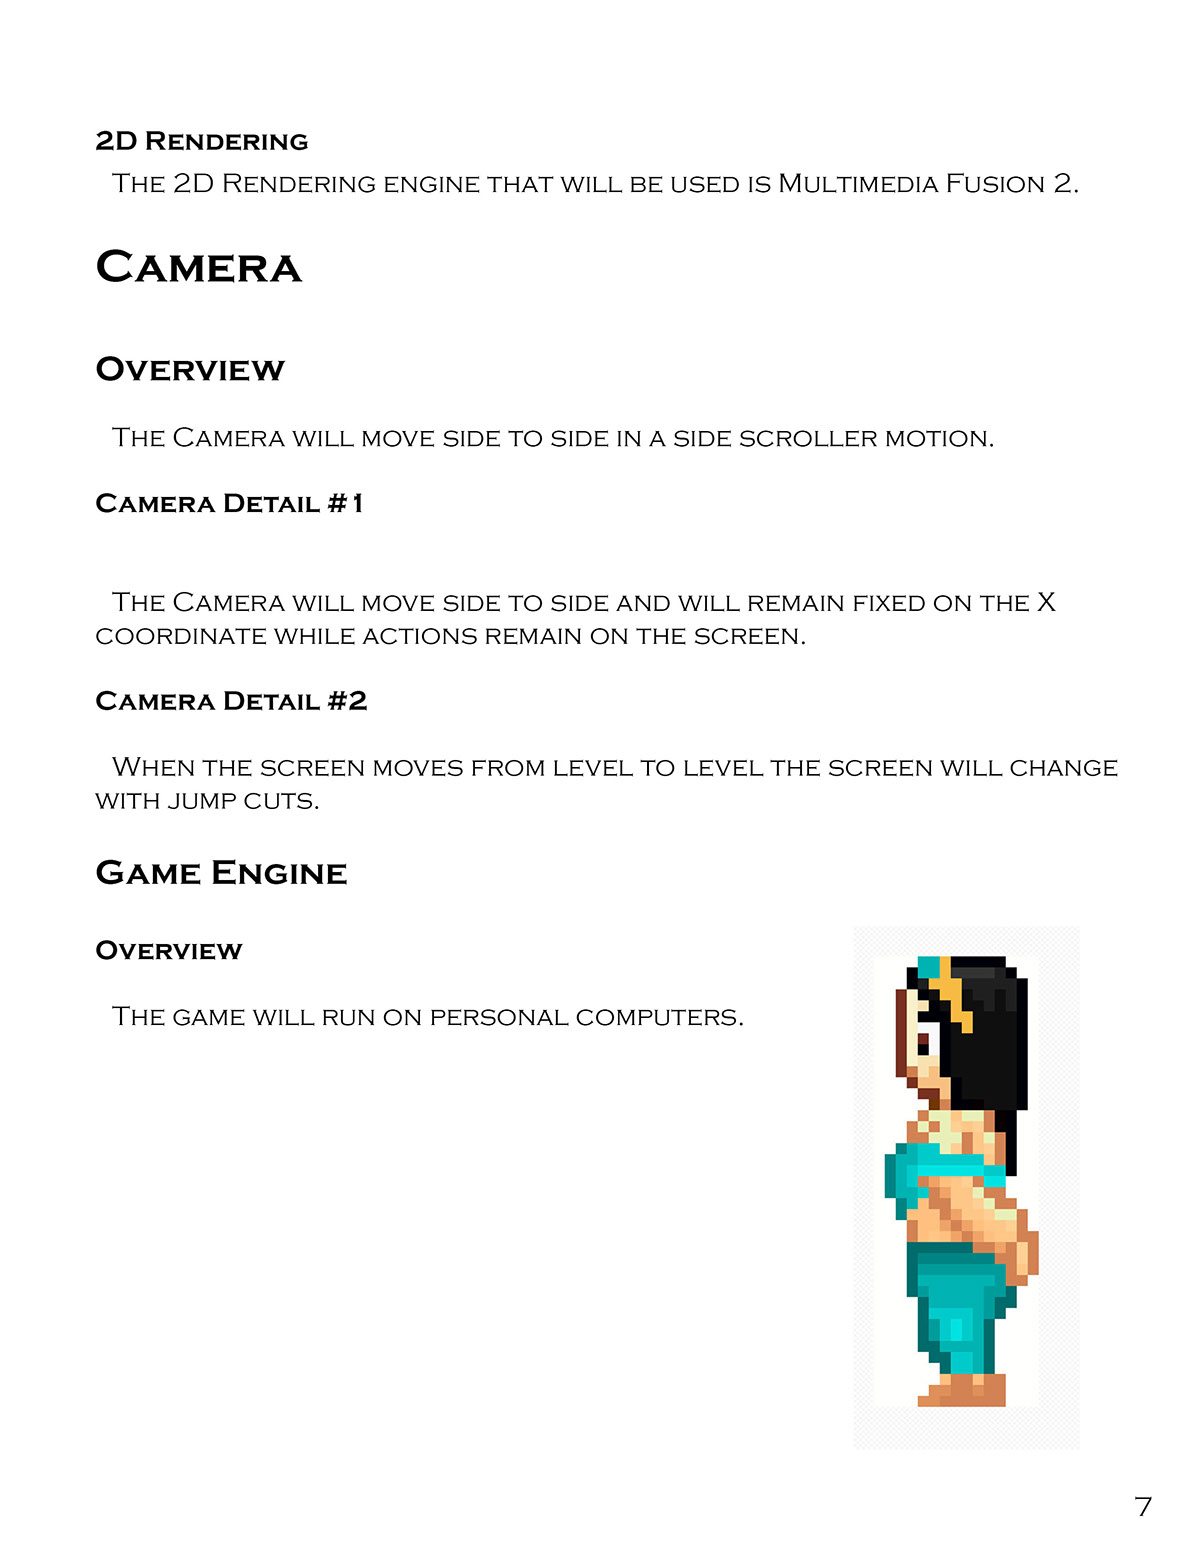 Video Game Design Video game proposal document Project disney